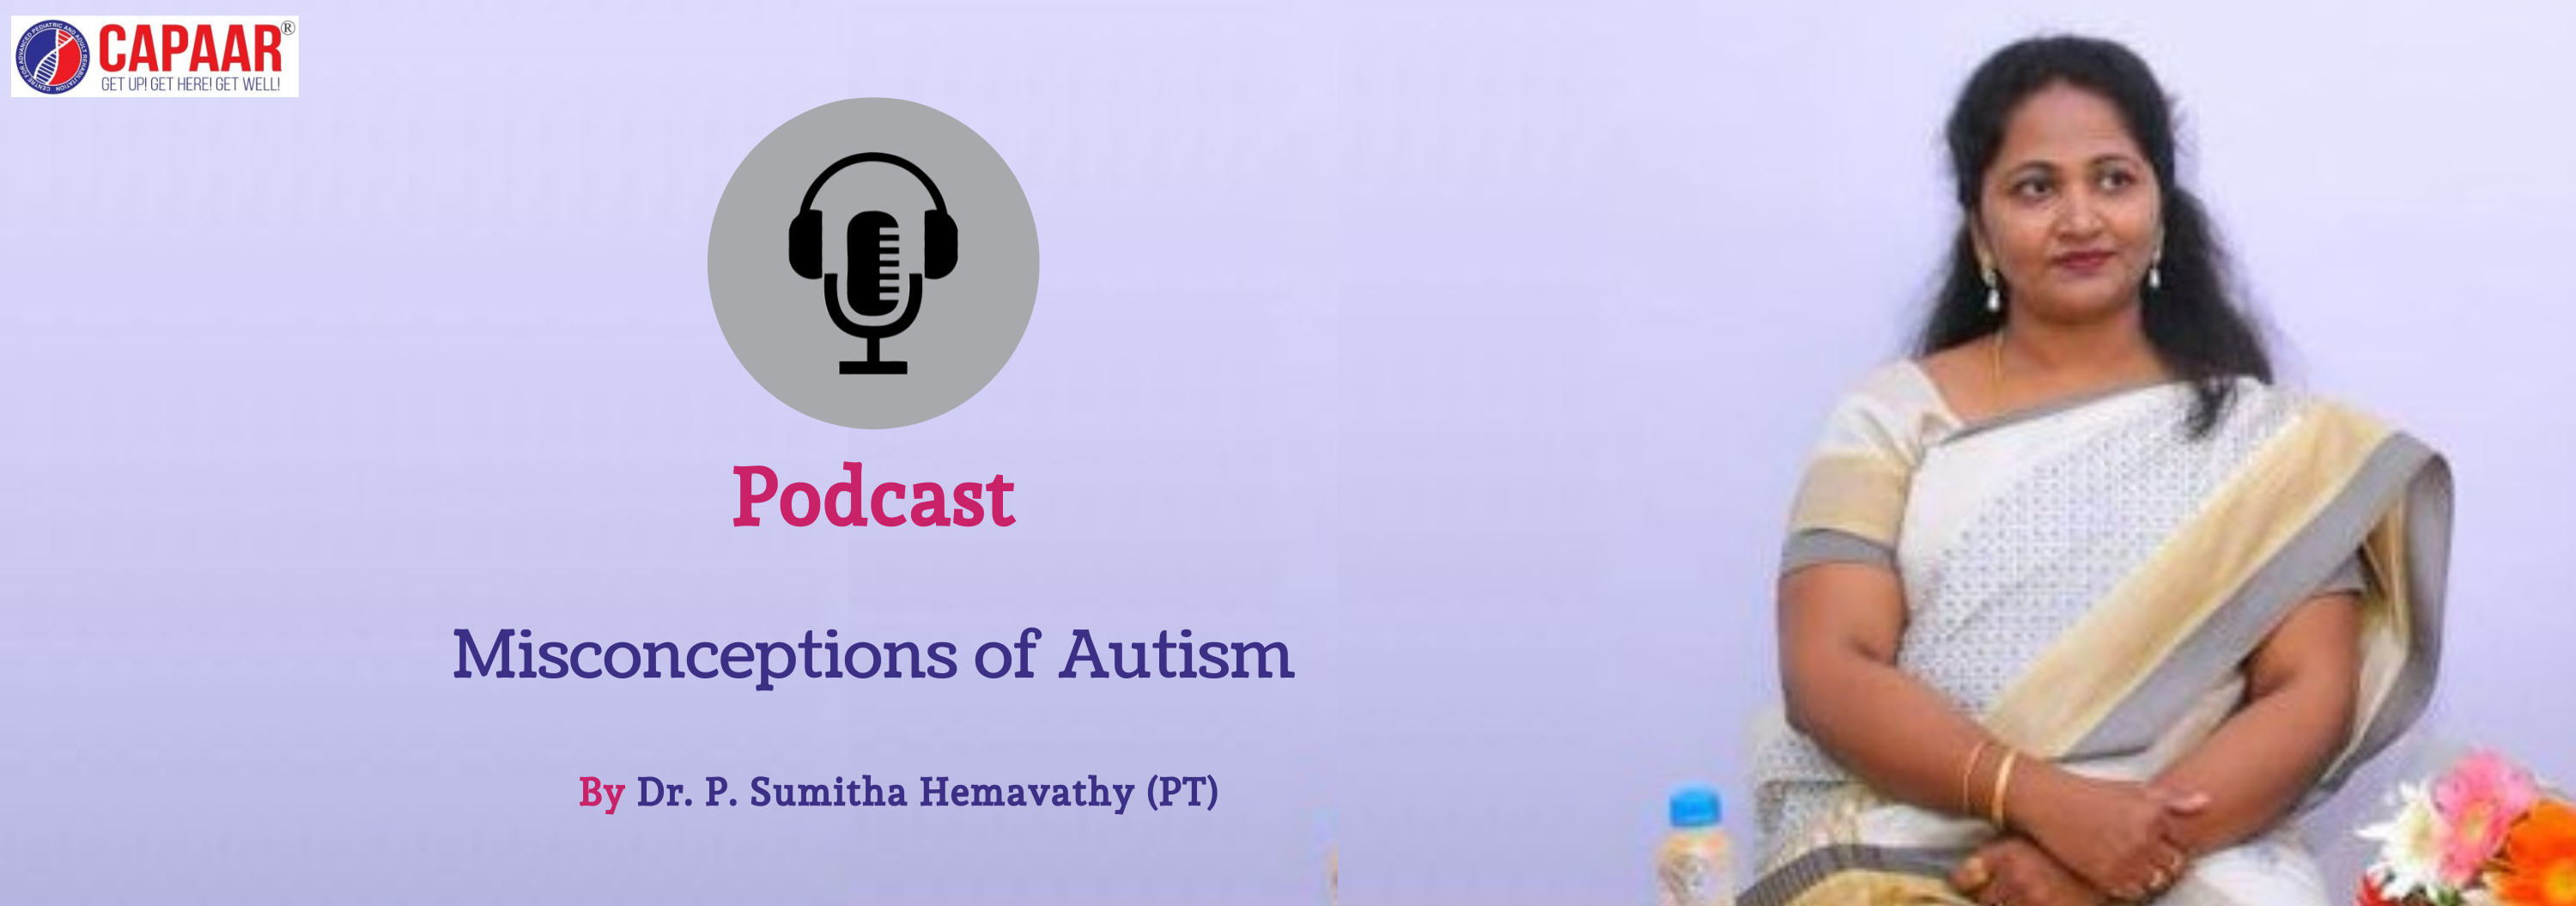 Podcast - Misconceptions of Autism Autism Treatment Near Me | CAPAAR